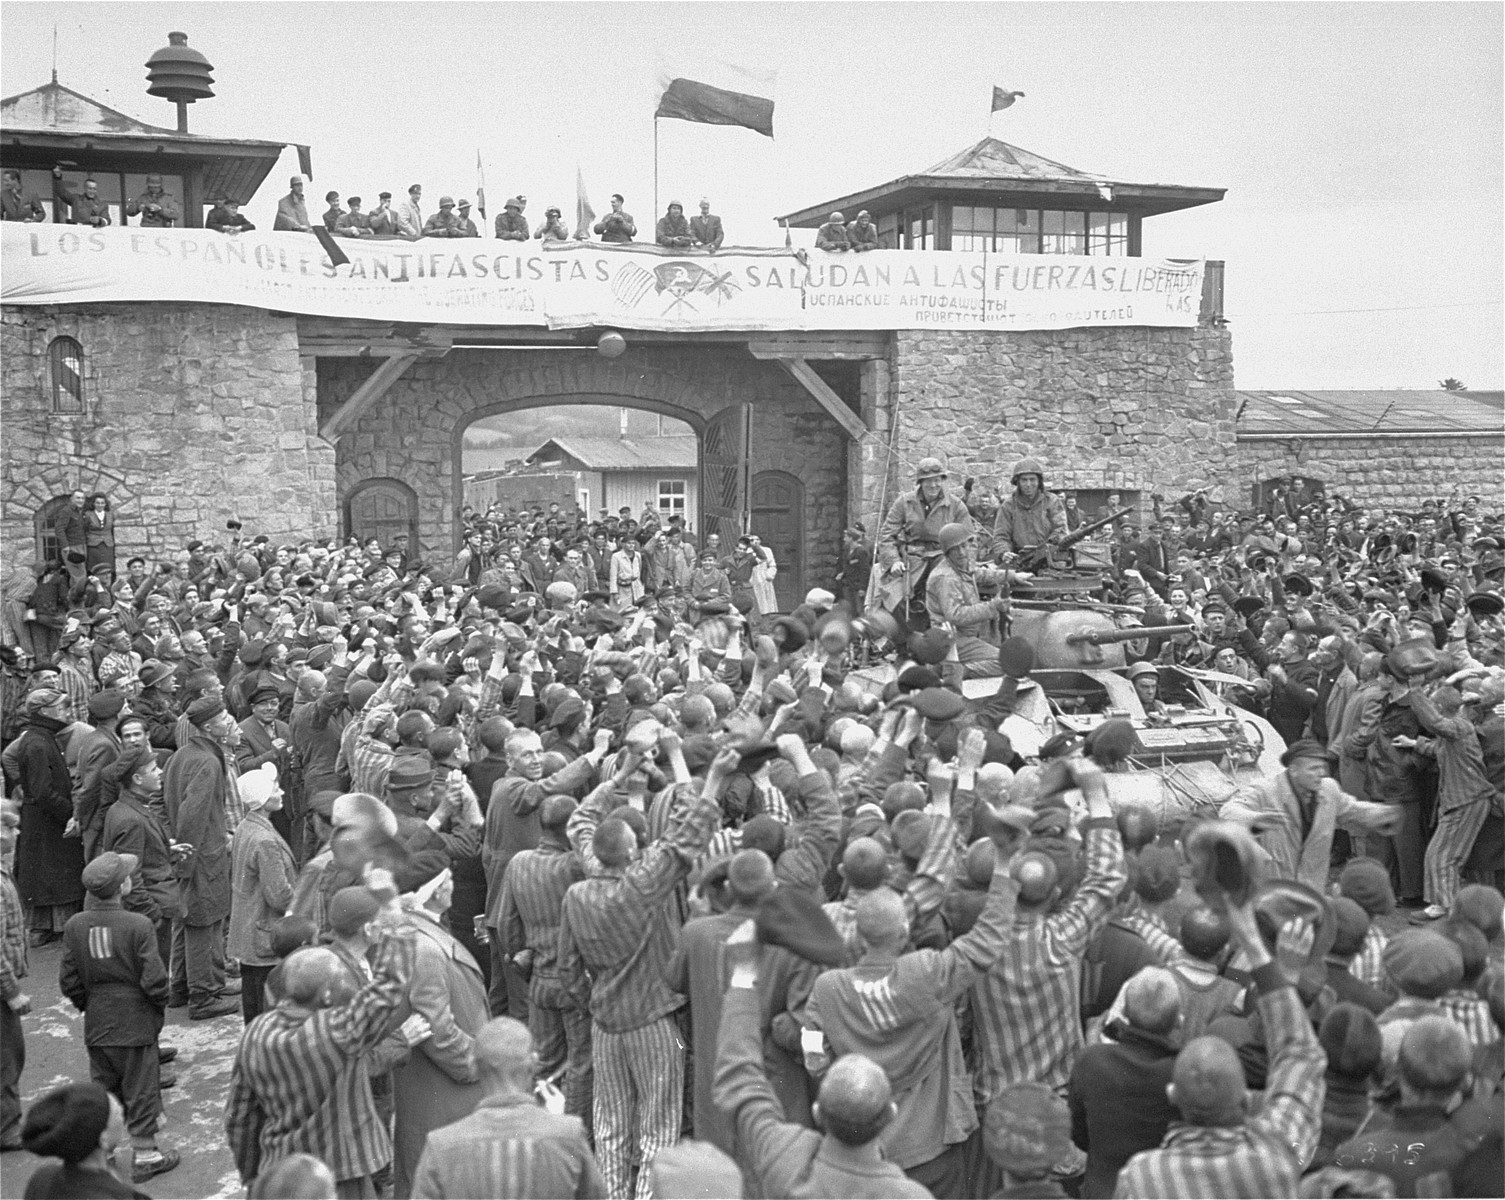 Mauthausen survivors cheer the soldiers of the Eleventh Armored Division of the U.S. Third Army one day after their actual liberation. 

The banner reads: "The Spanish Anti-Fascists Salute the Liberating Forces."  According to Pierre Serge Choumoff, a survivor of Mauthausen and Gusen, this event was recreated at the request of a senior American officer.

The photographer Francisco Boix can be seen with his camera standing on top of the entrance.  According to the 11th Armored Division website the solders are John Slatton (back left), Jerome Rosenthal (back right), William Picket (left) and Edward Czarnowski (driver).  Alternatively Robert Mordis, a Jewish soldier from Natick Massachusetts, may be on the upper left side of the tank, and another soldier may be Alfred Paliani.